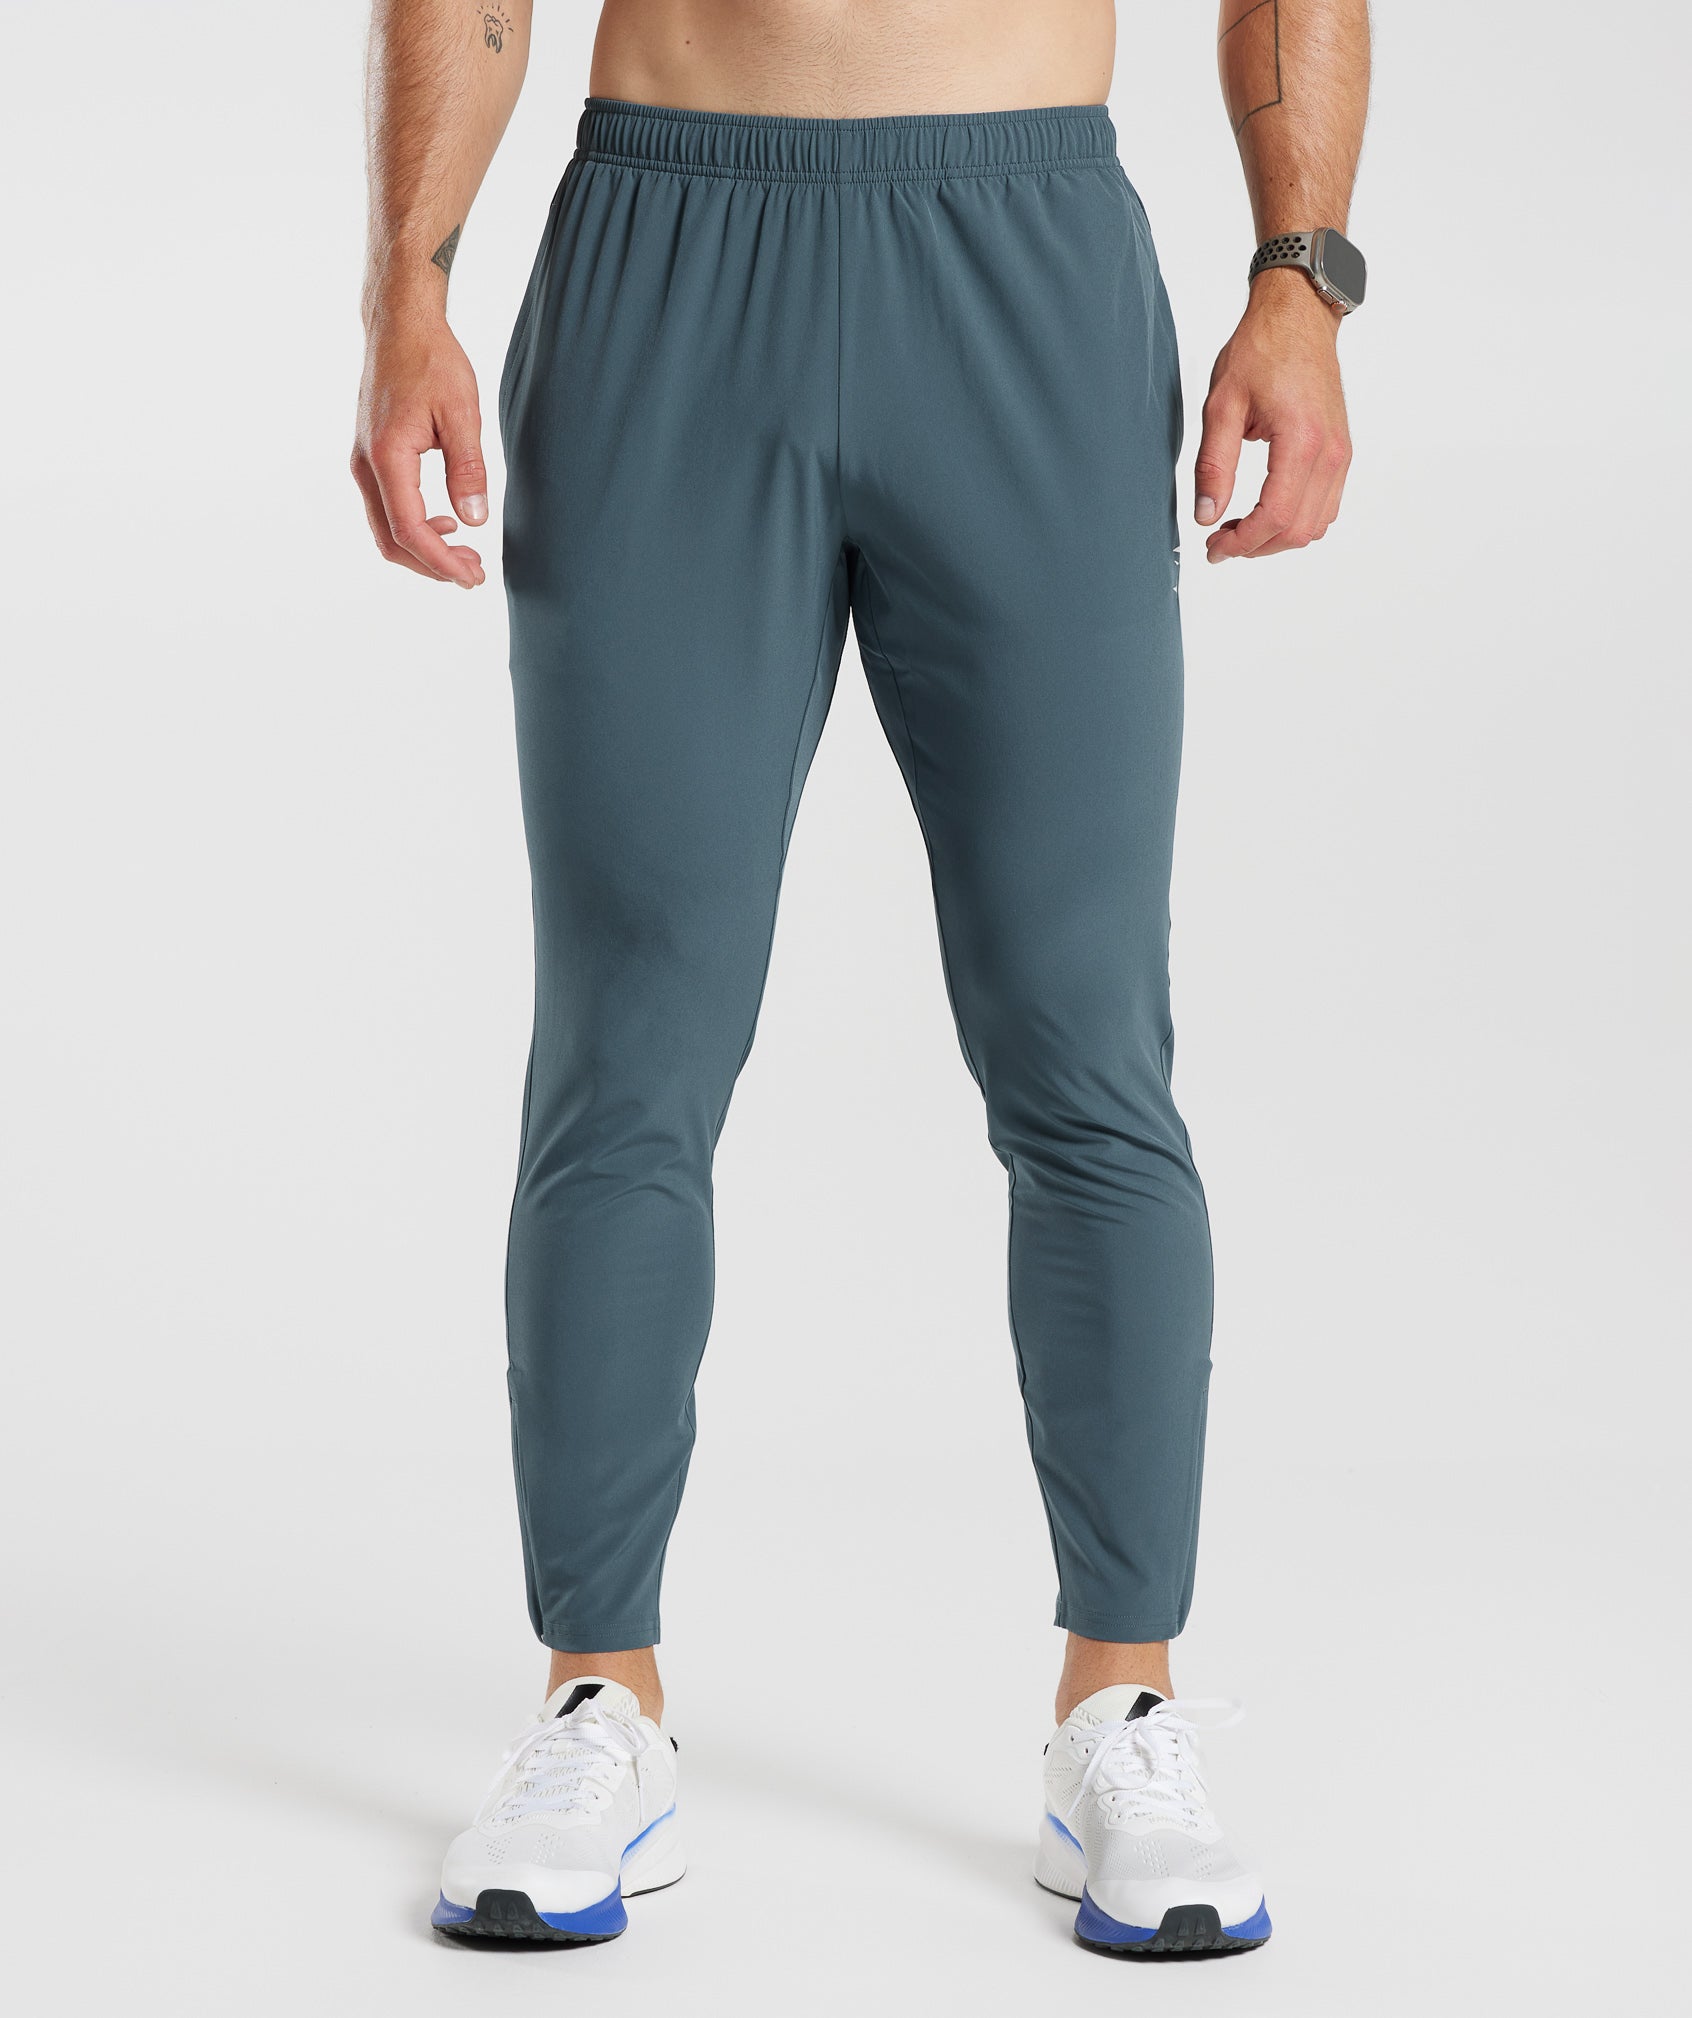 Arrival Jogger in Smokey Teal - view 1